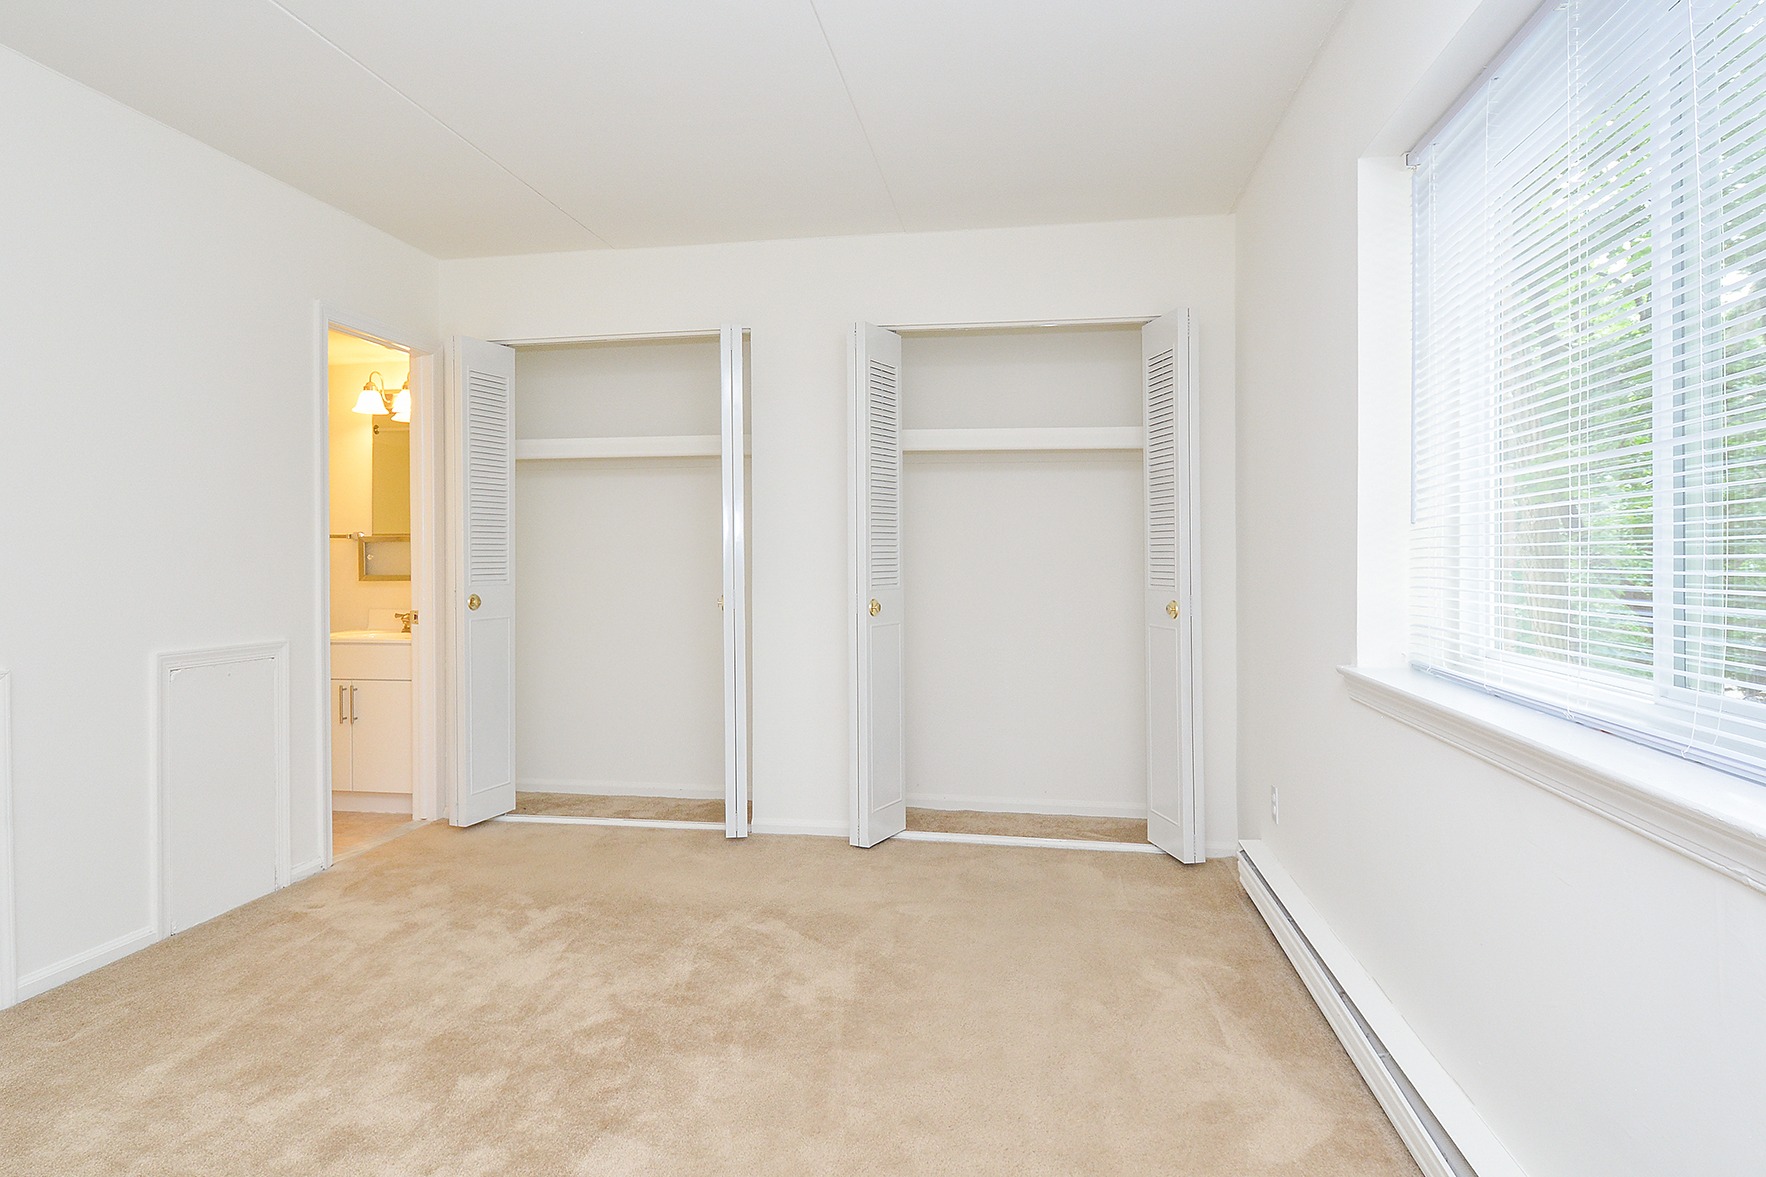 Carpeted bedroom with a large window, closet space, and a bathroom connected.